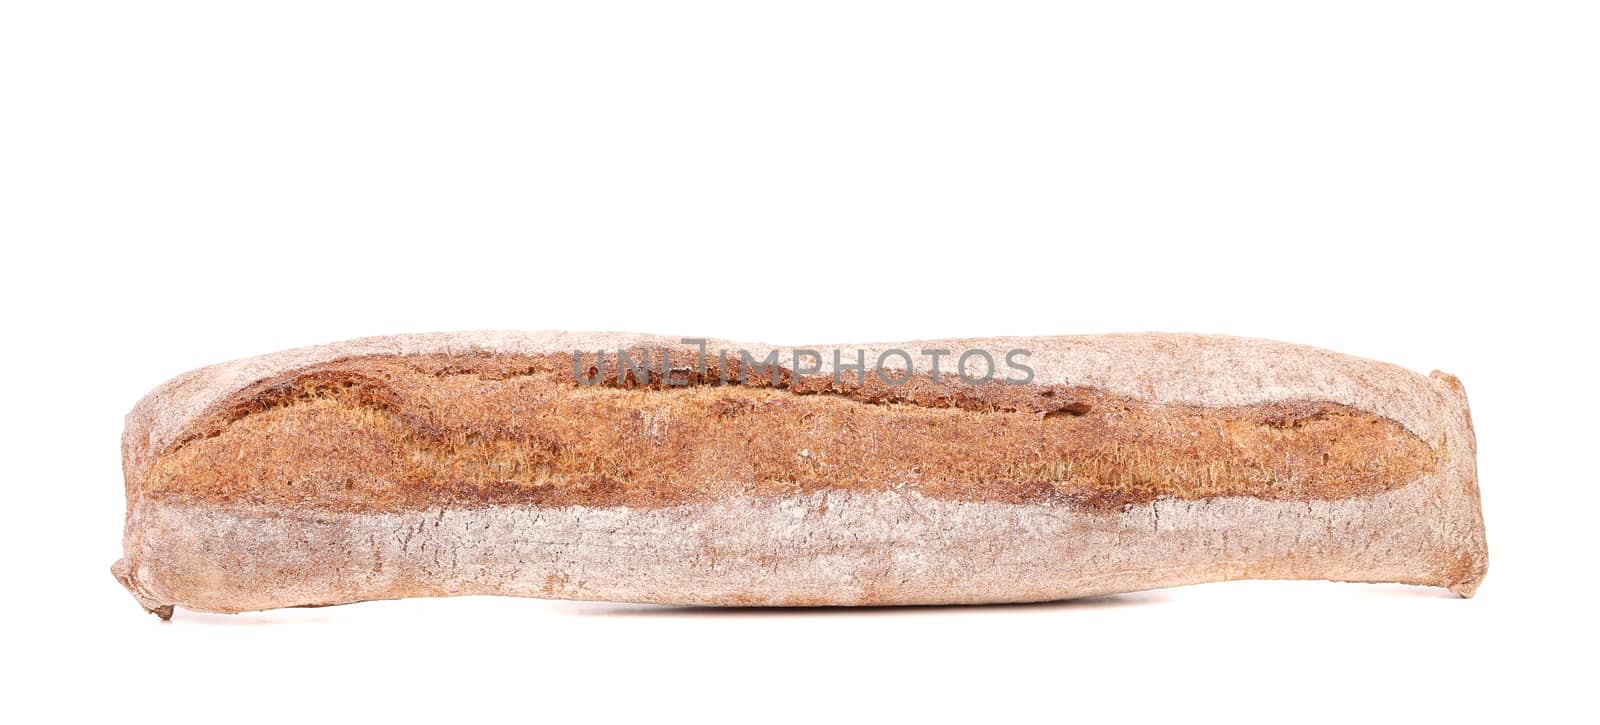 Long loaf by indigolotos